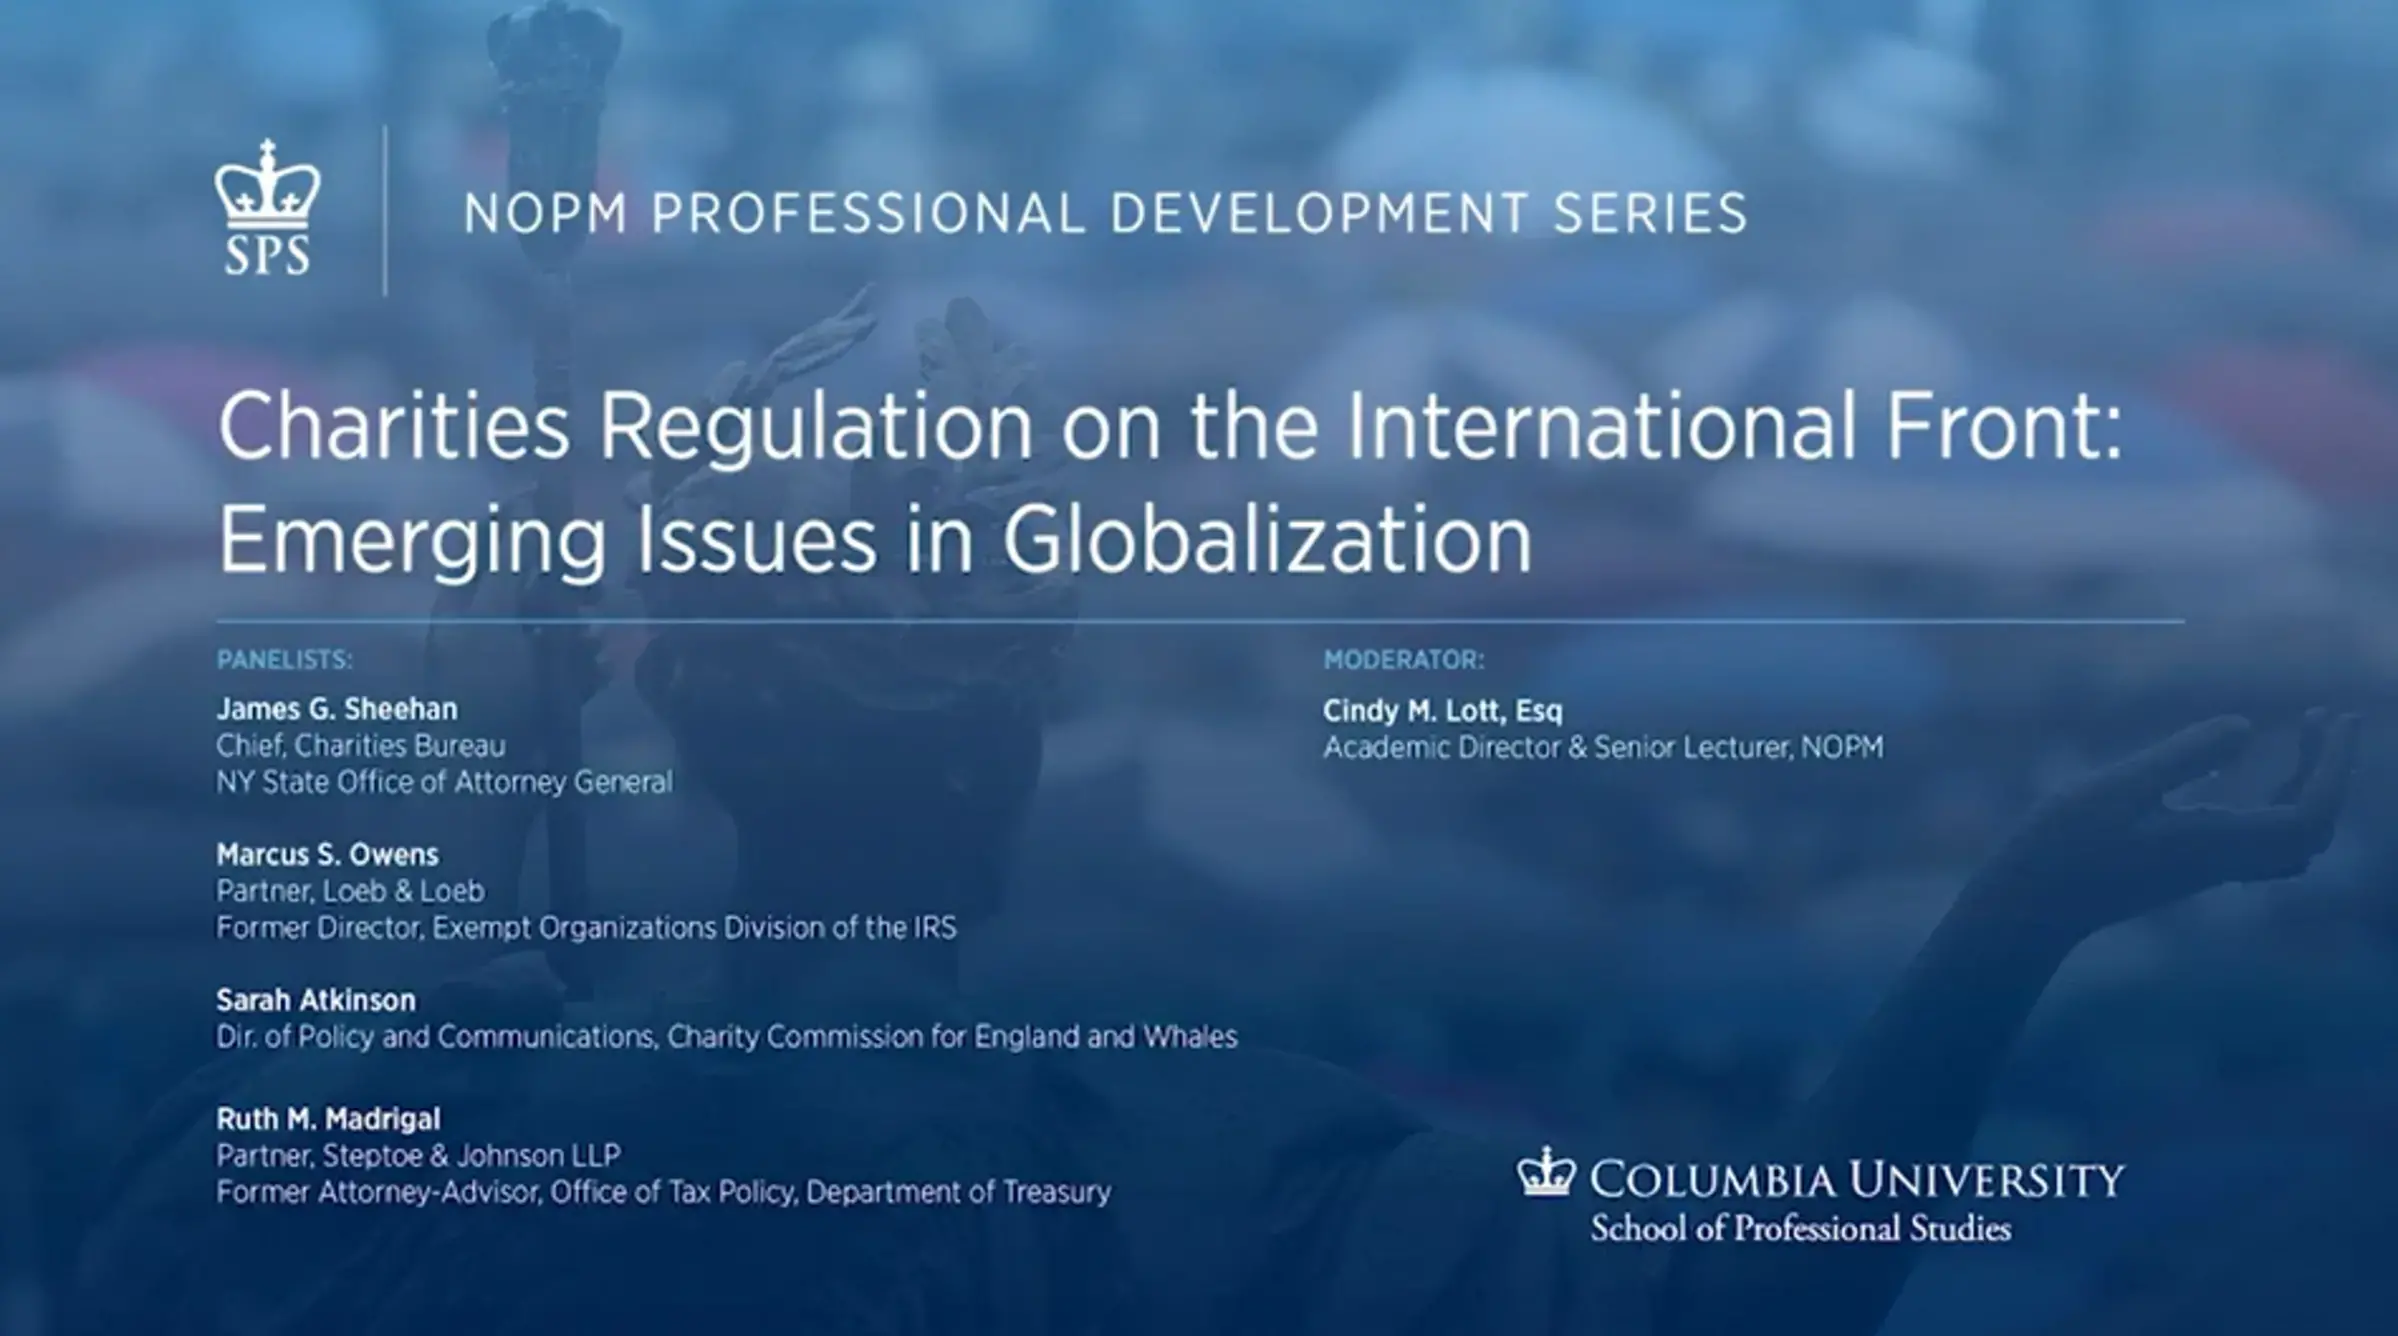 Charities Regulation on the International Front: Emerging Issues in Globalization